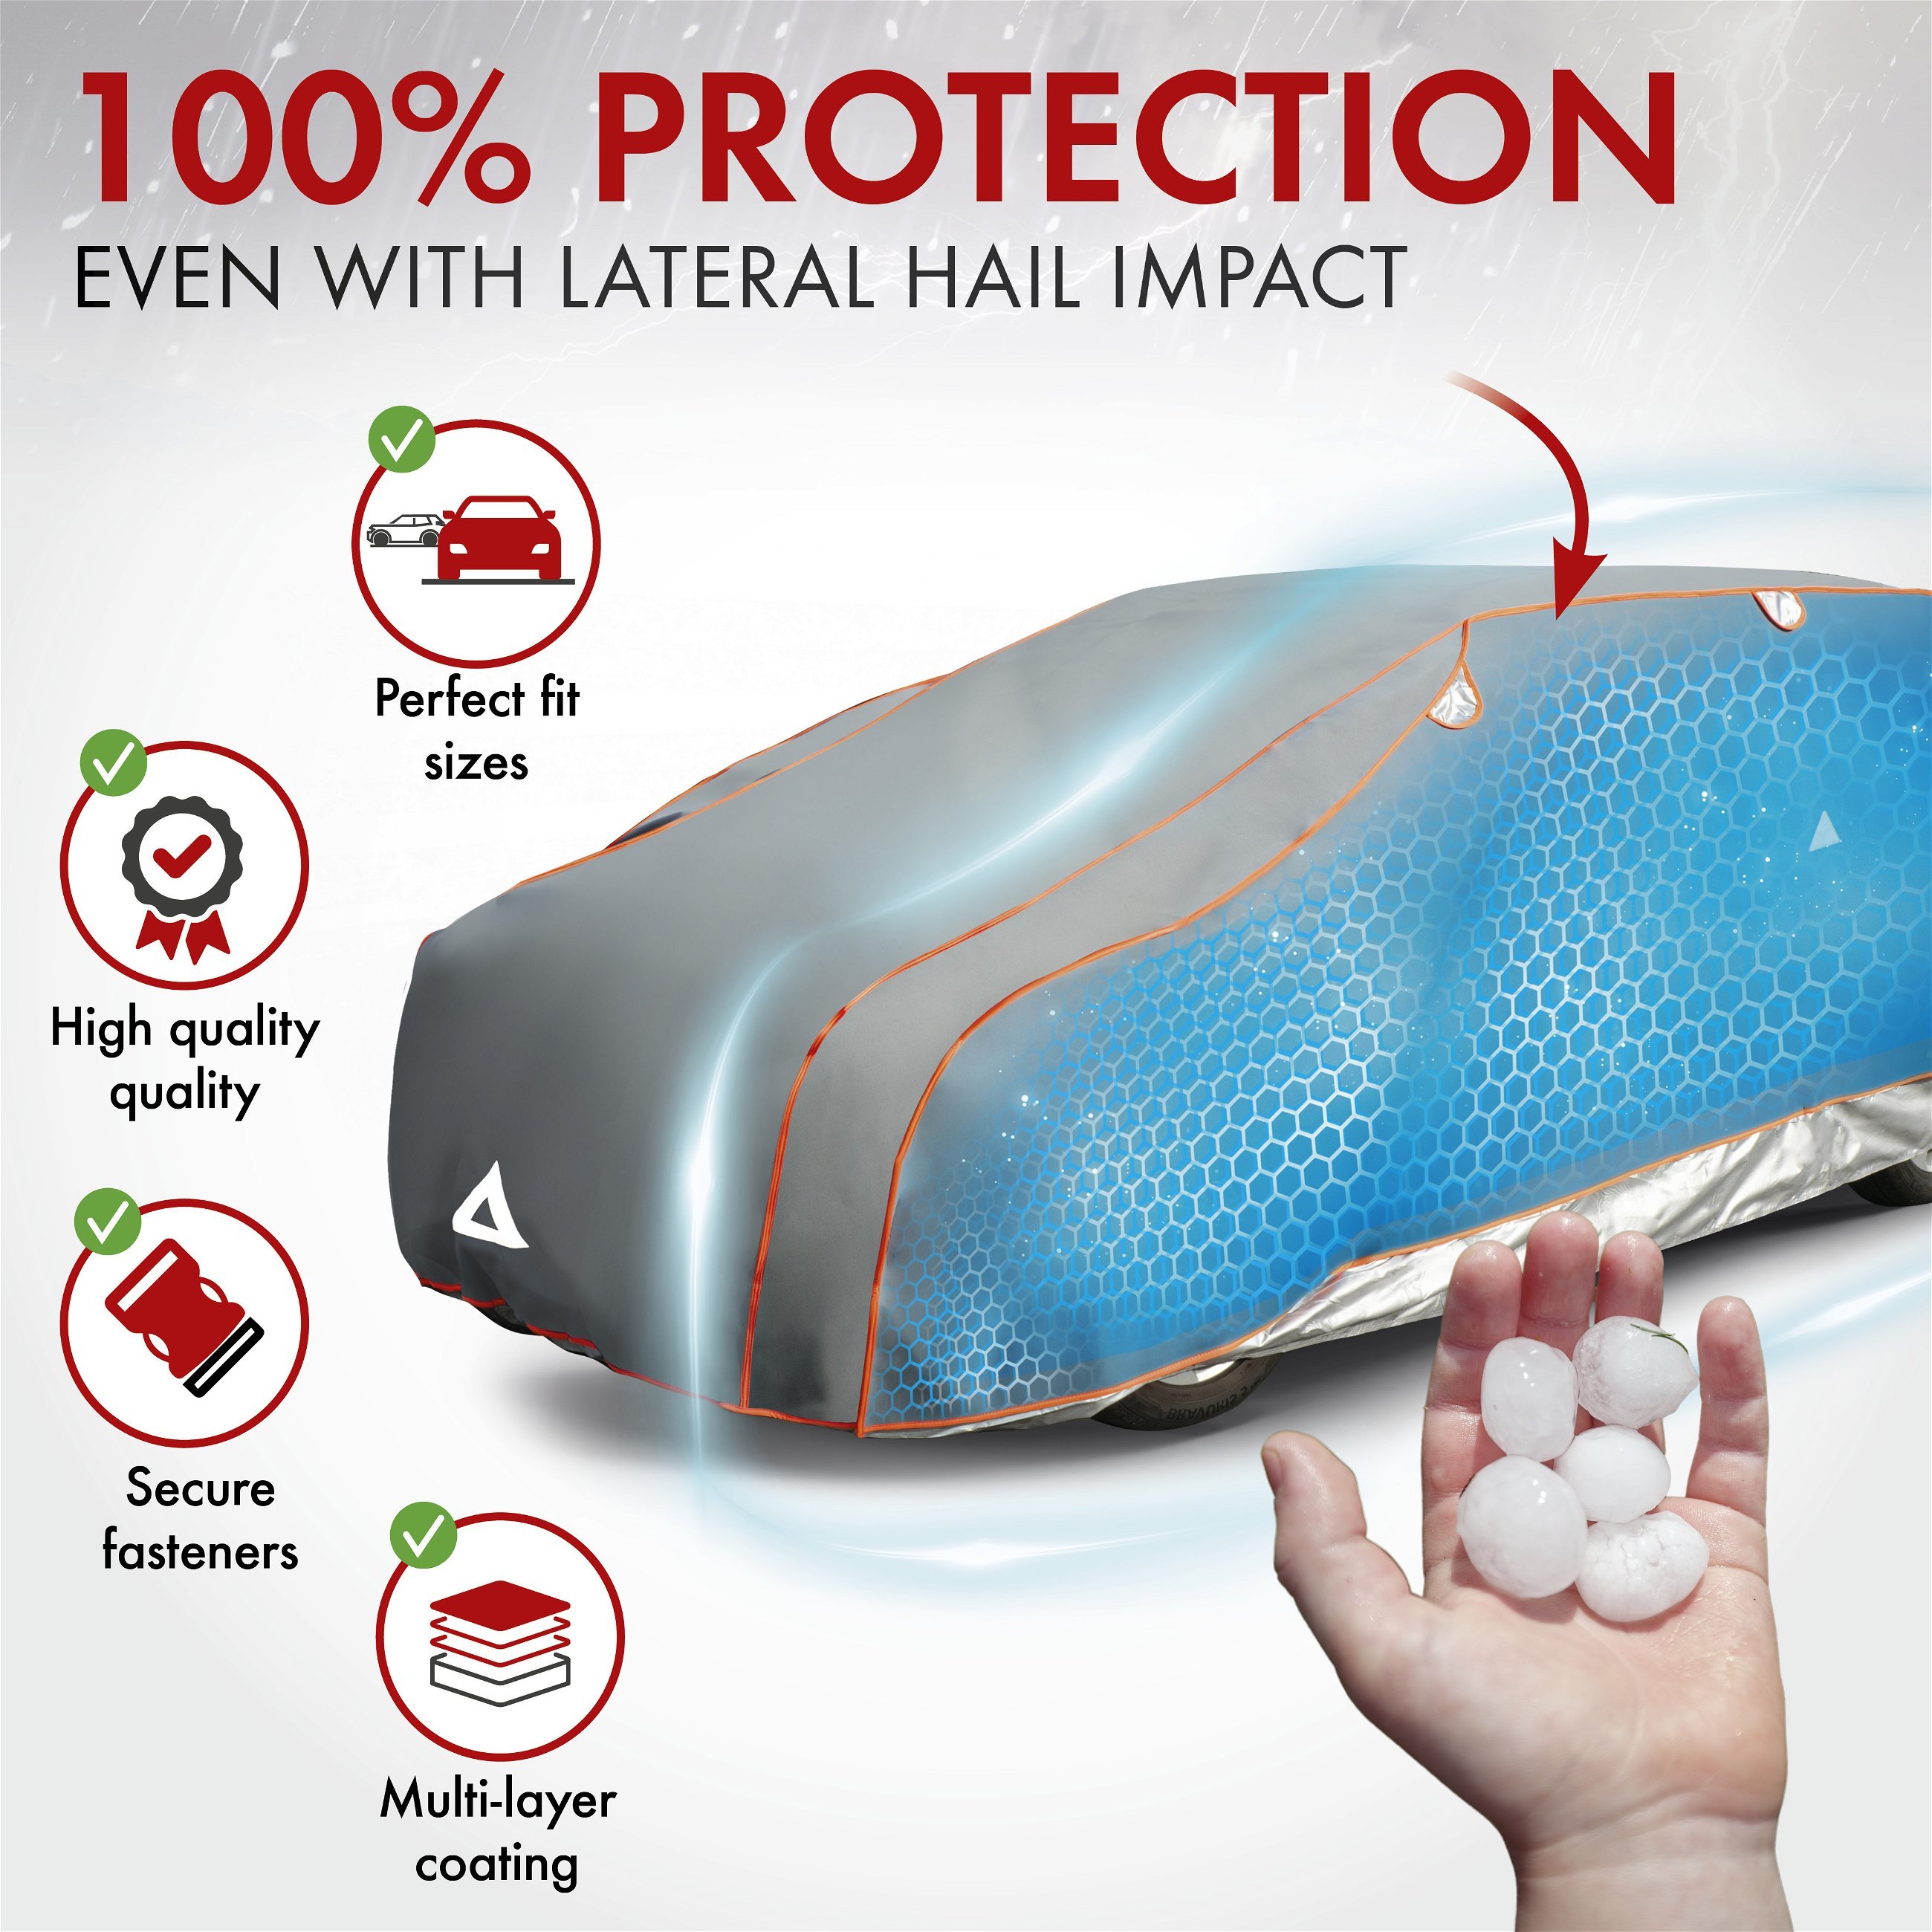 Hail protection cover Perma Protect Complete size SUV L